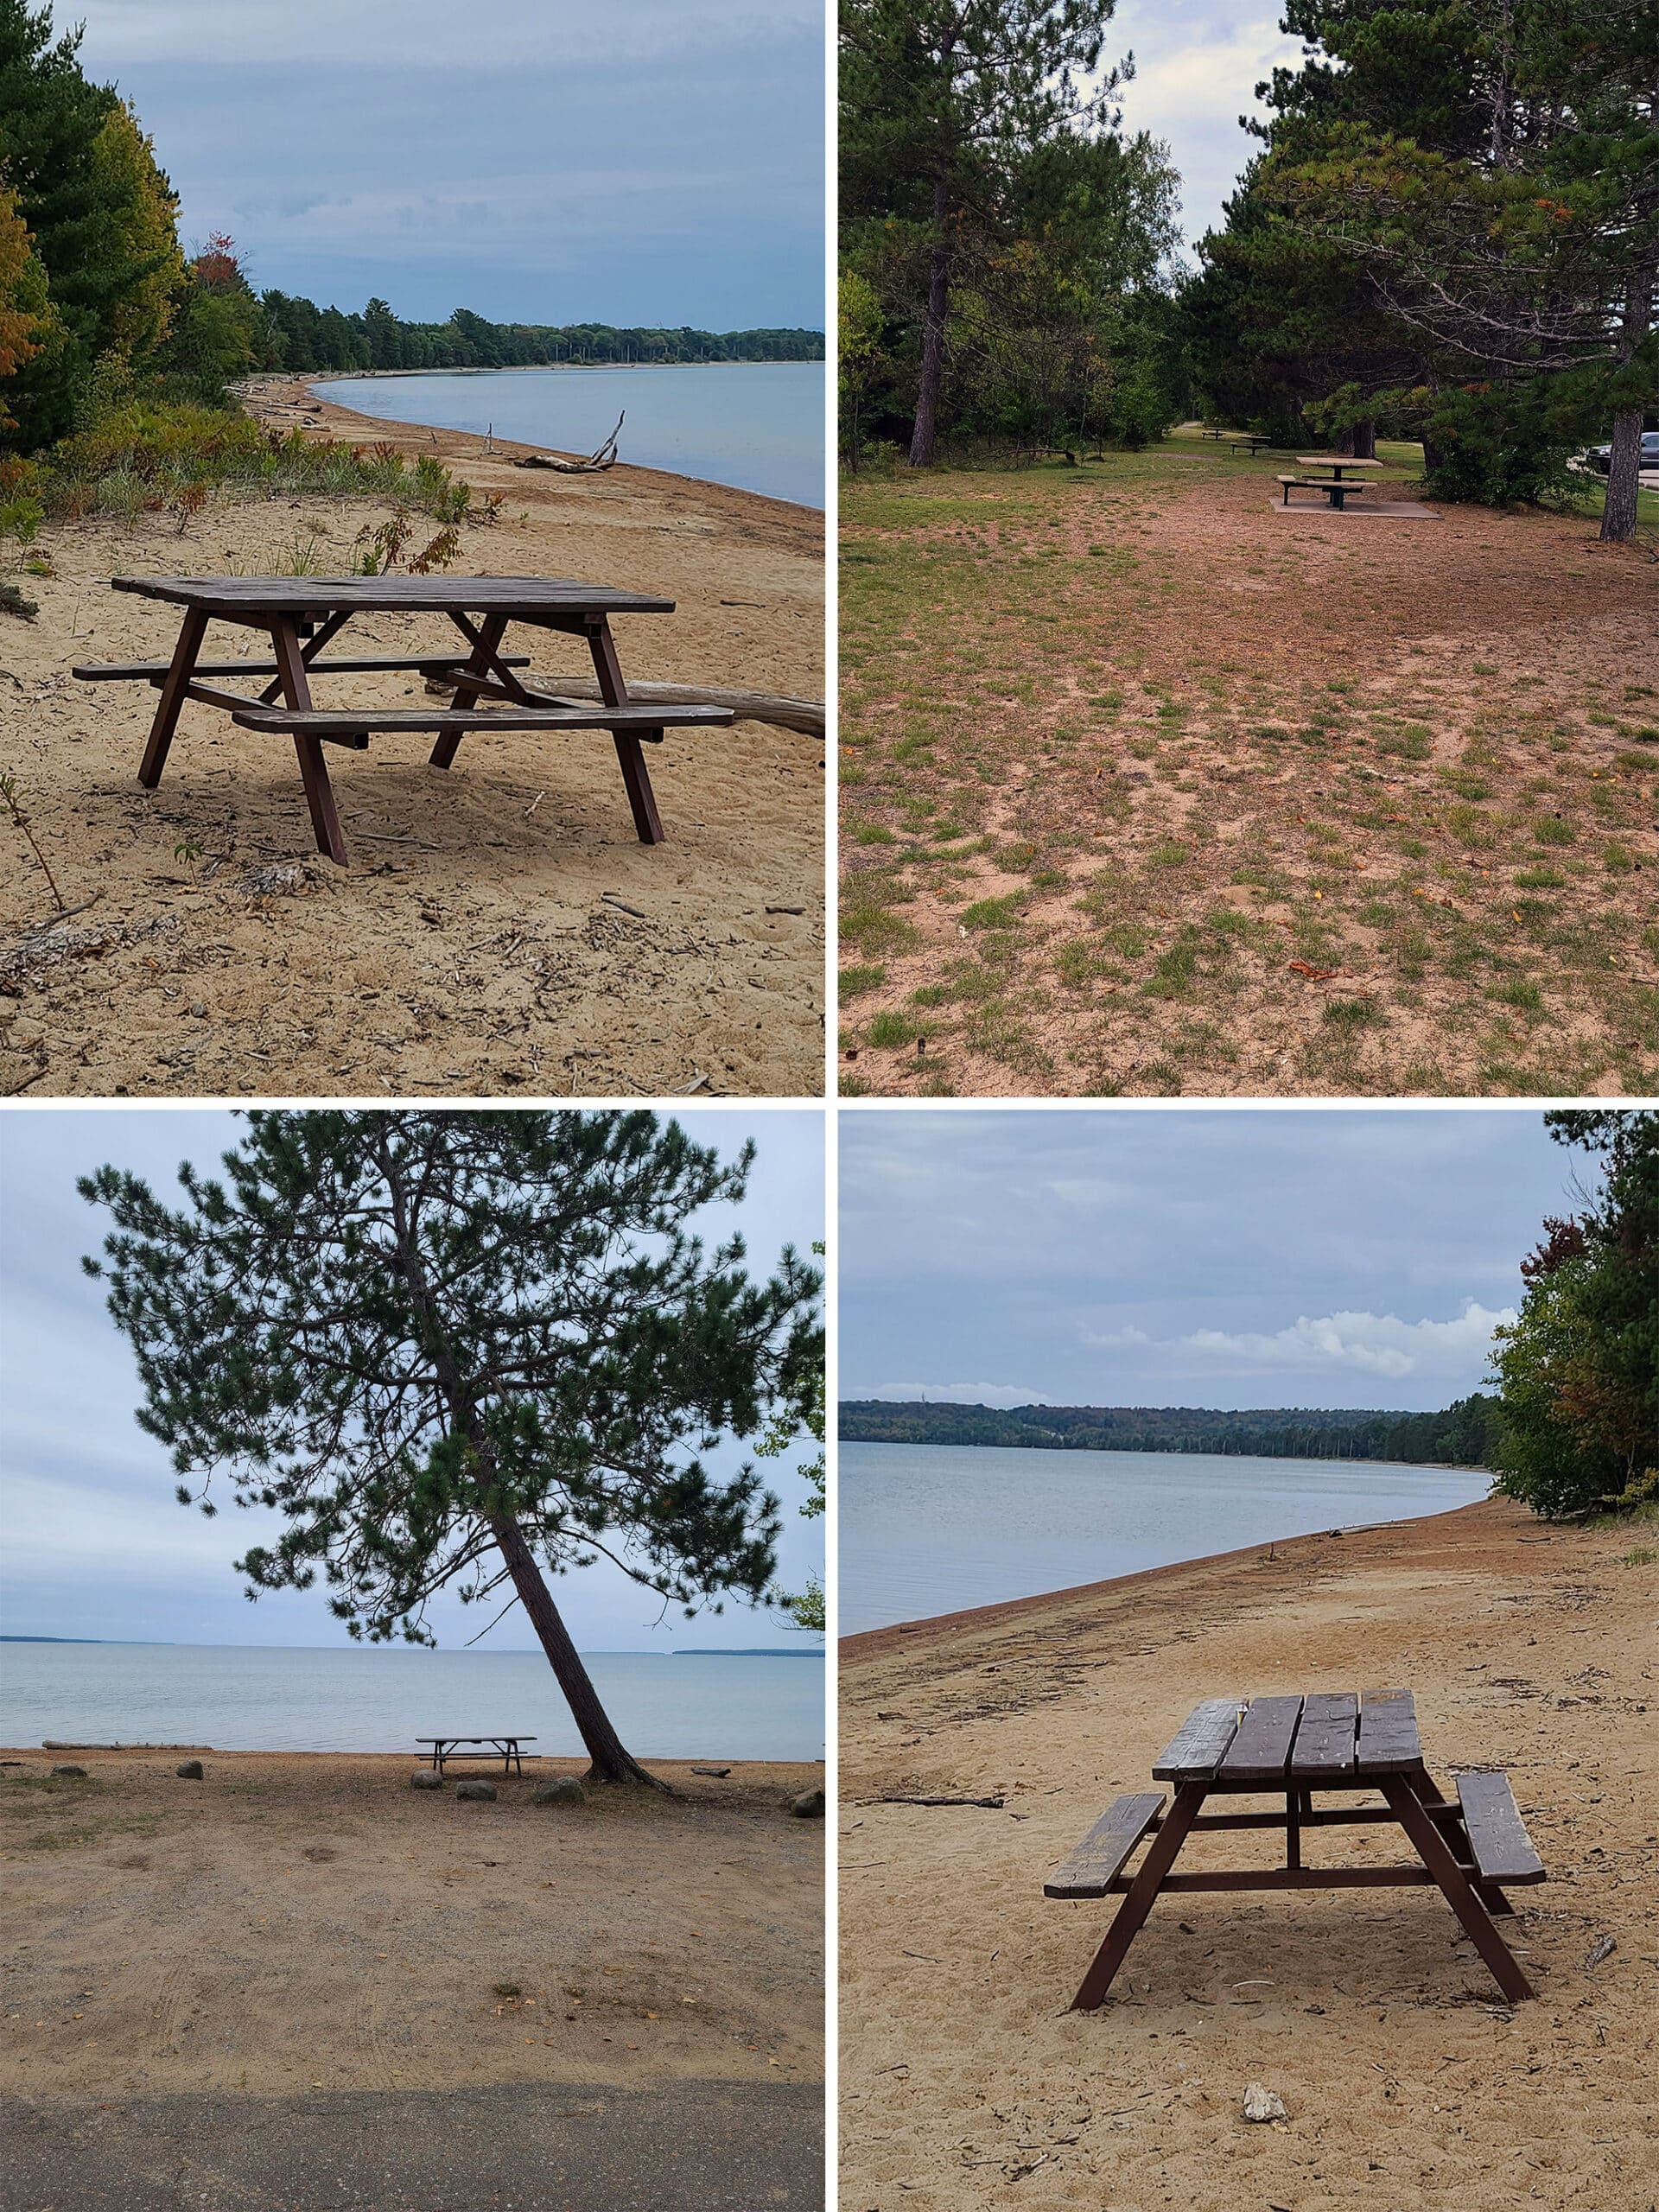 4 part image showing various views of picnic tables at Batchawana Bay.  Most are on the beach.